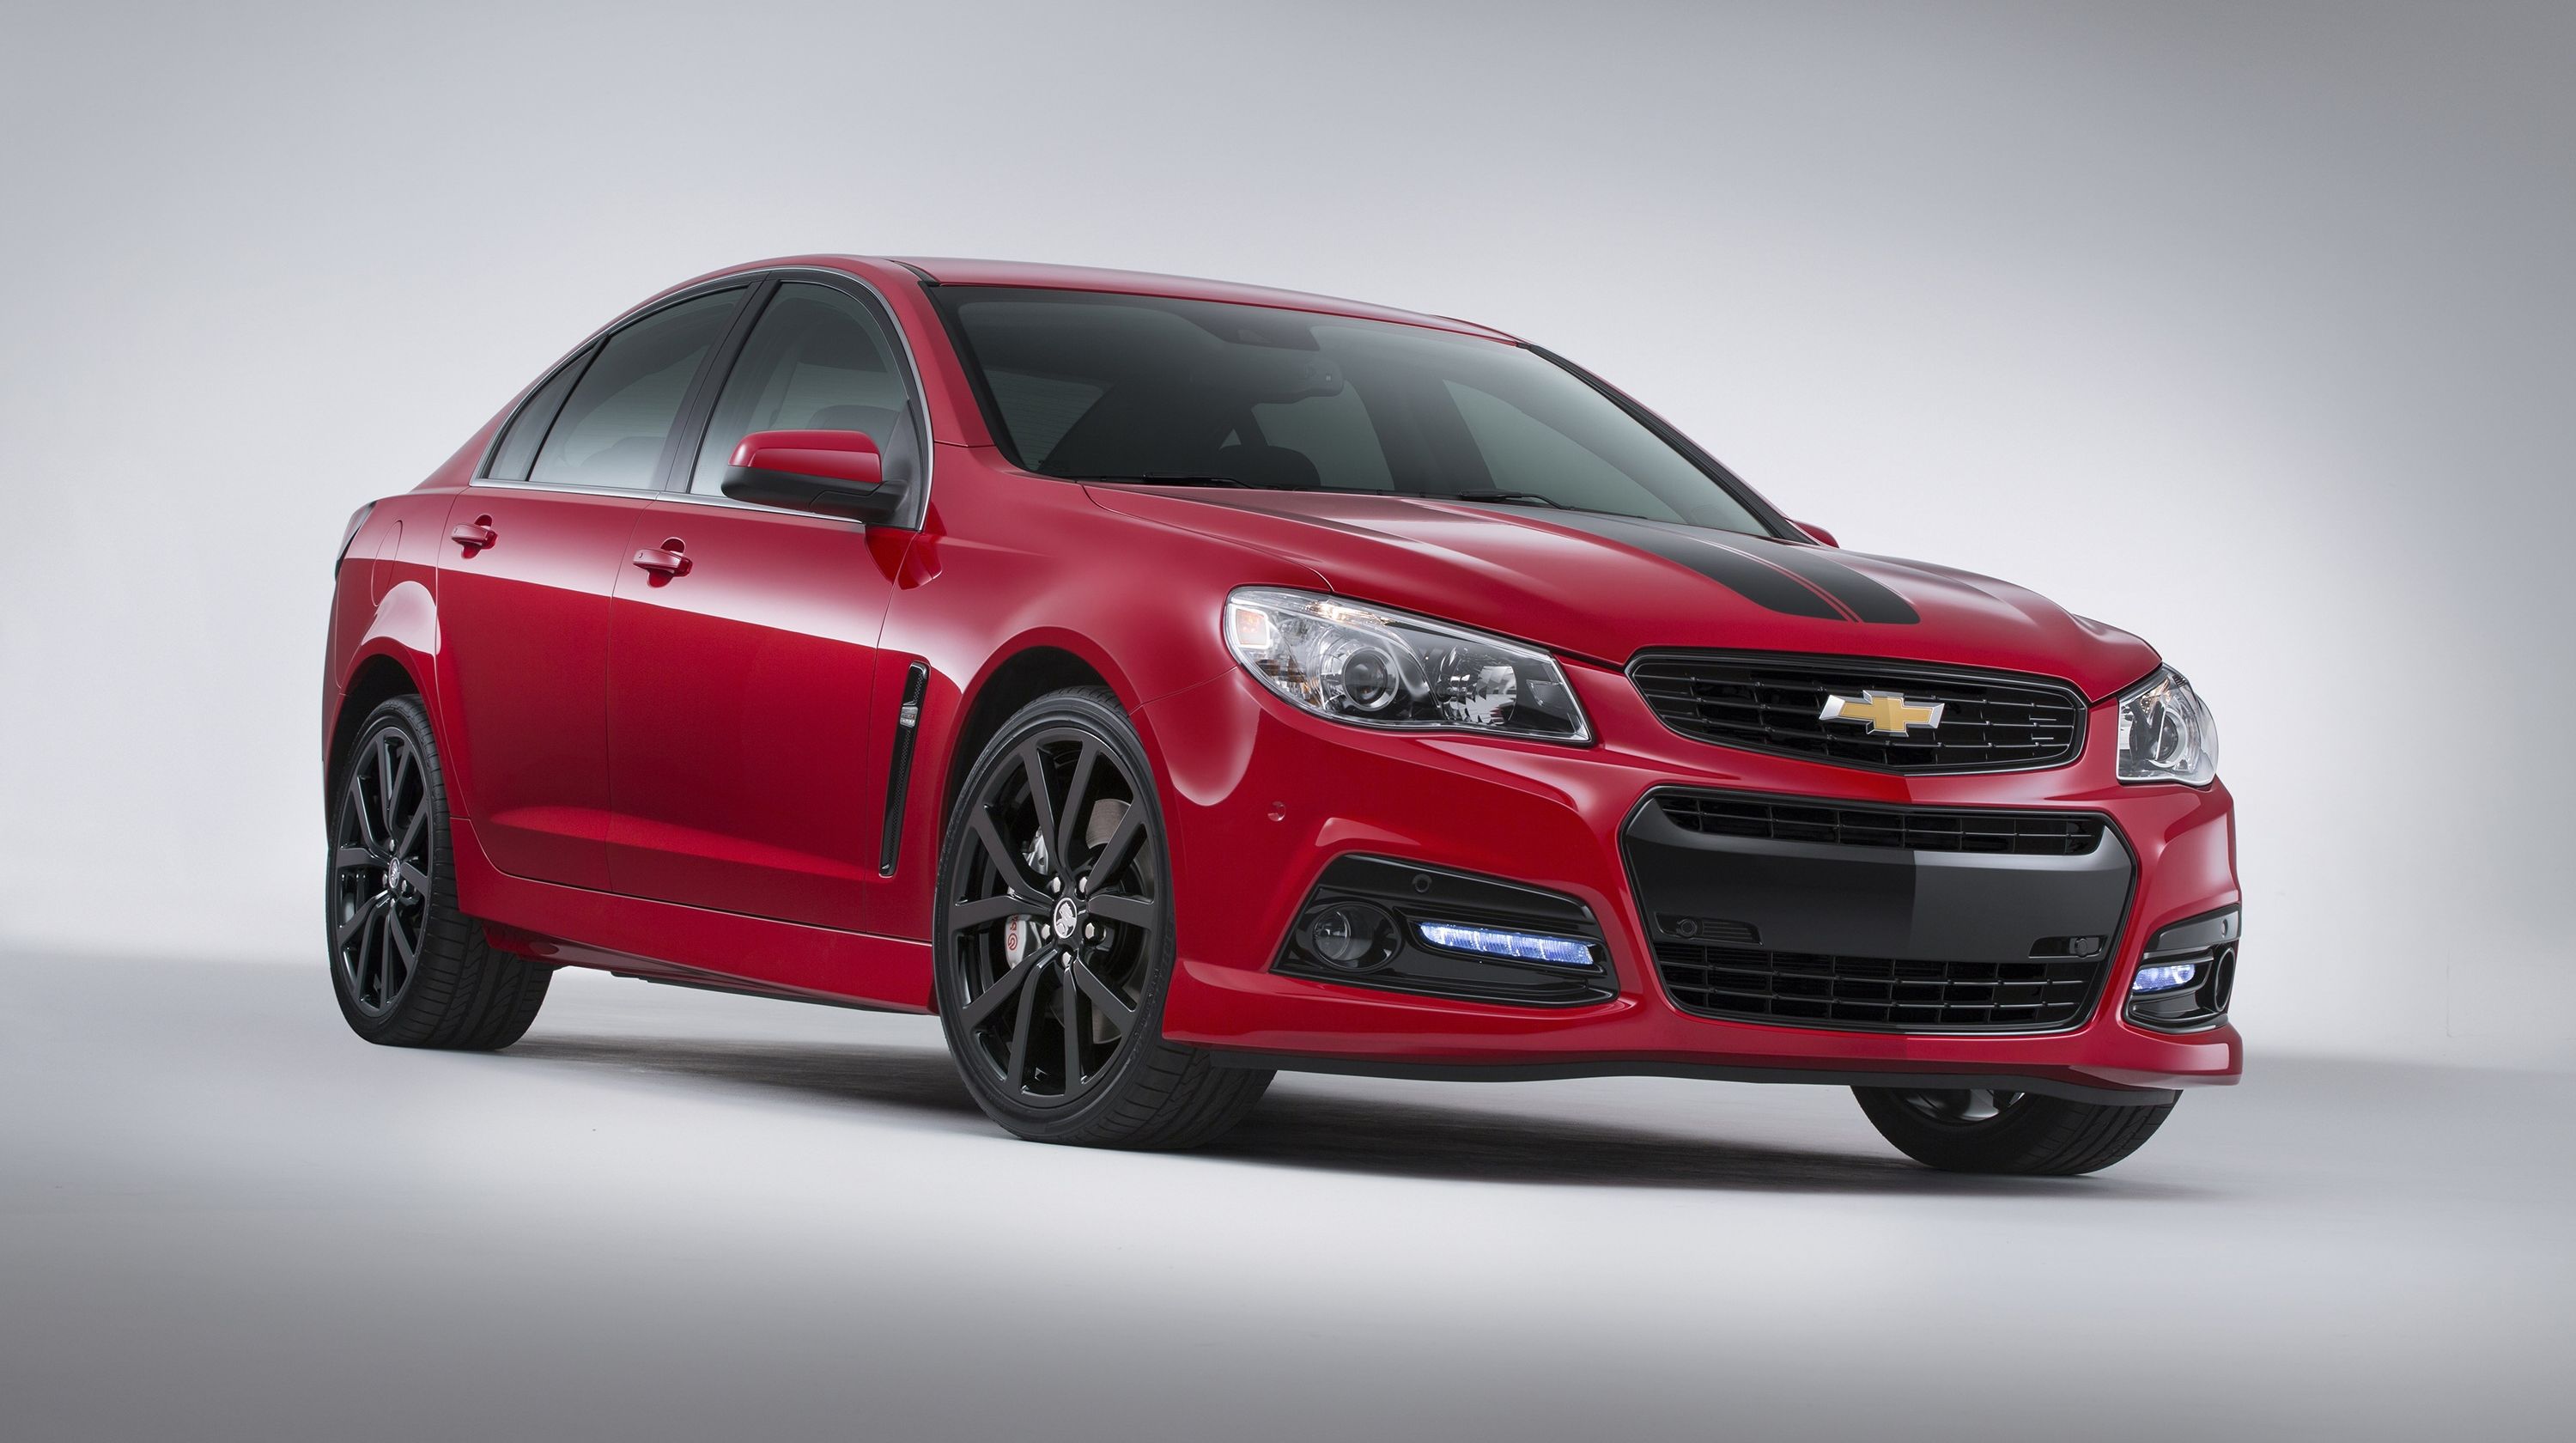  Cool concept for SEMA, but what's with the Holden logos? 